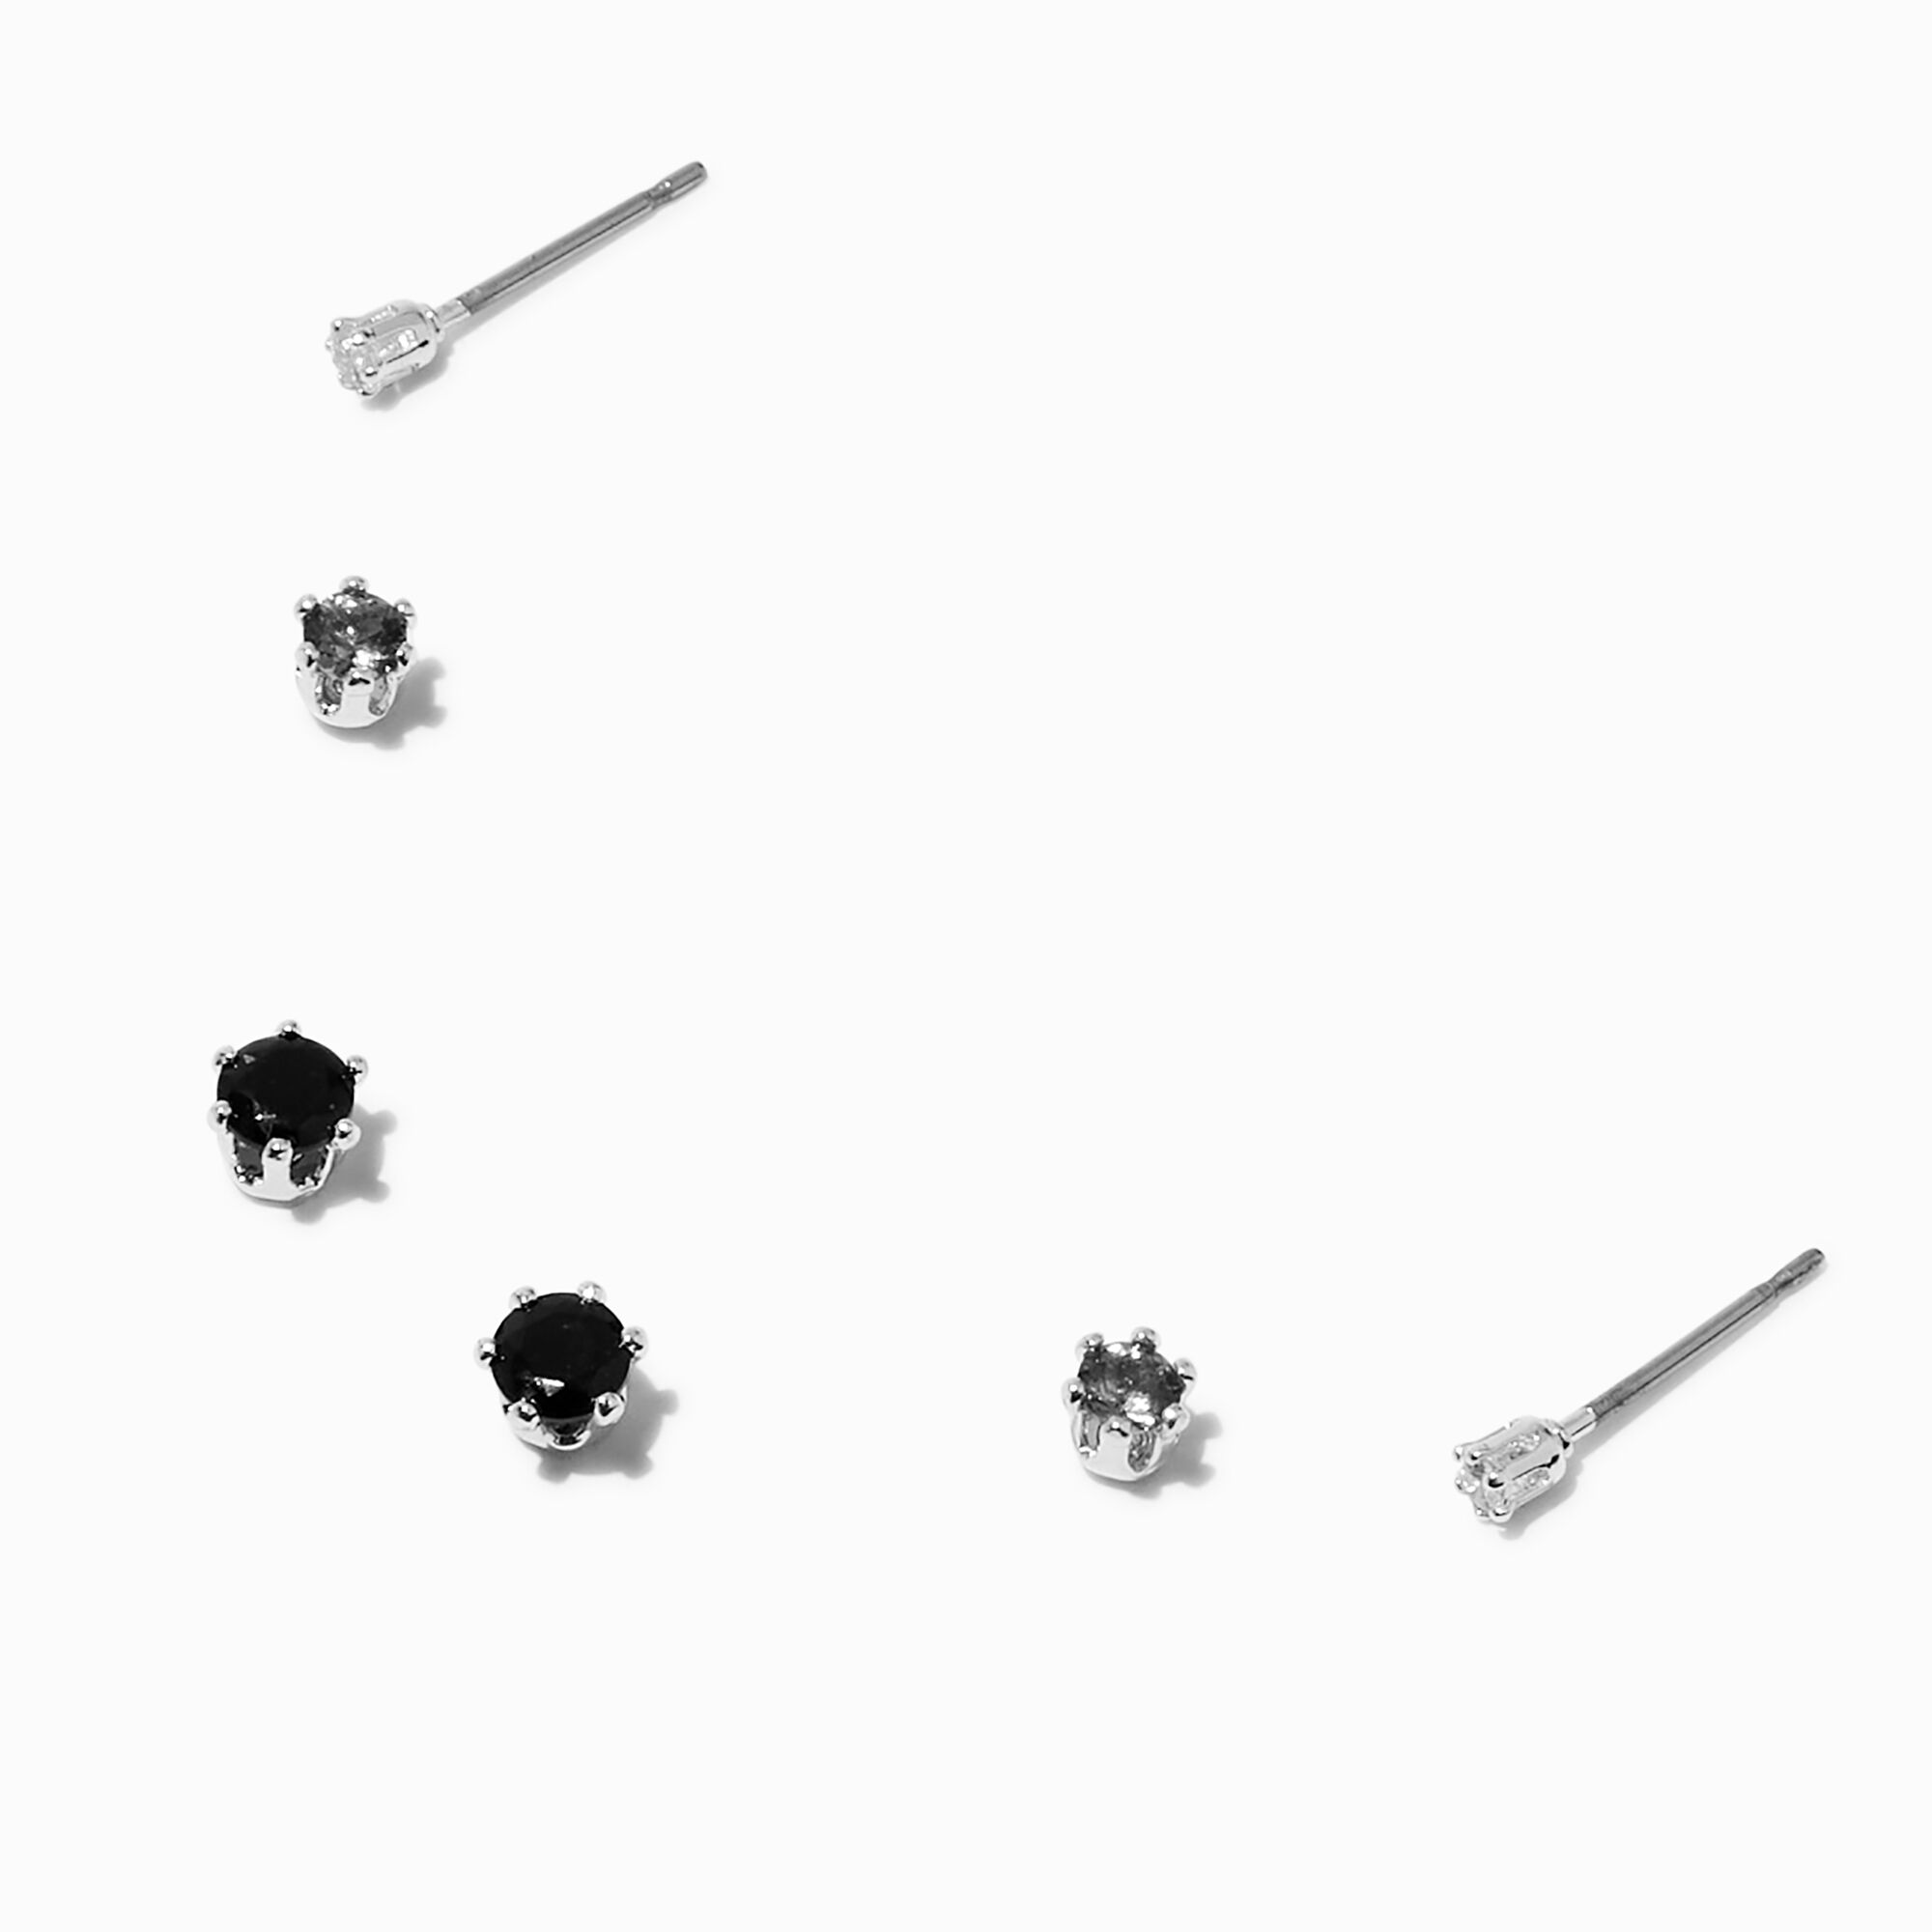 View Claires SilverTone Black Clear Cubic Zirconia Stackable Stud Earrings 3 Pack Gray information